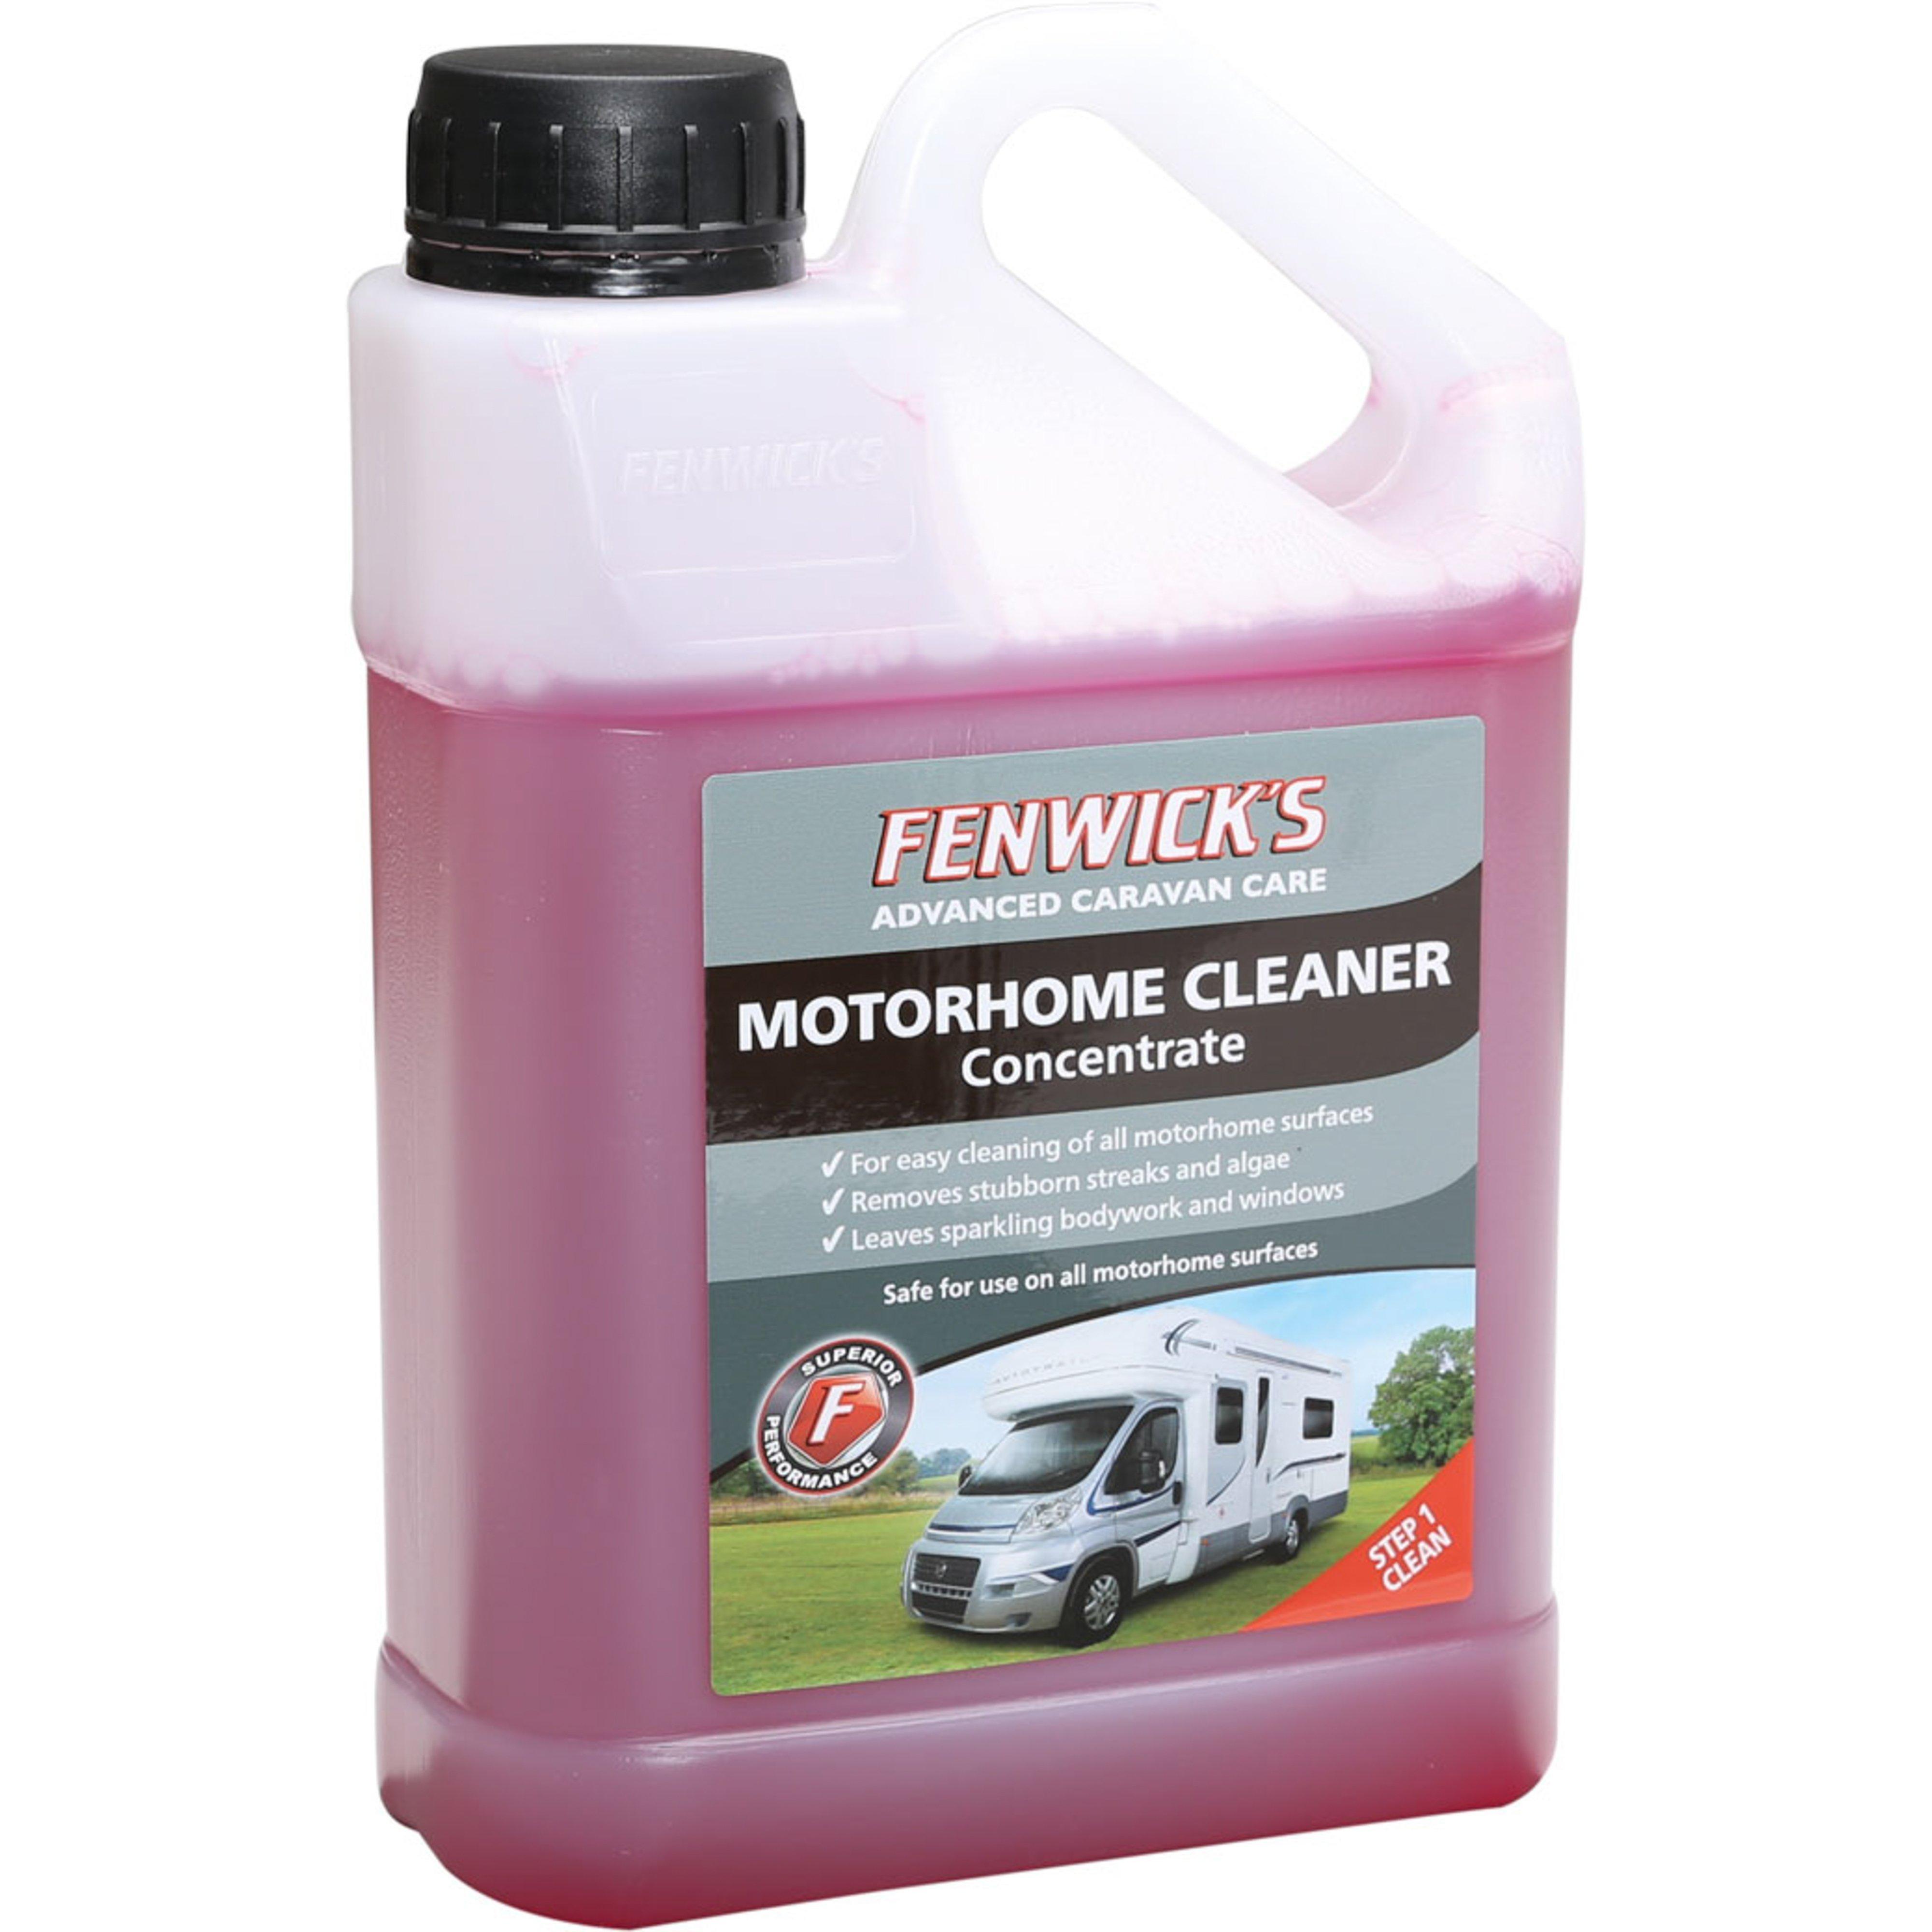 Fenwicks Motorhome Cleaner Concentrate (1 Litre) Review